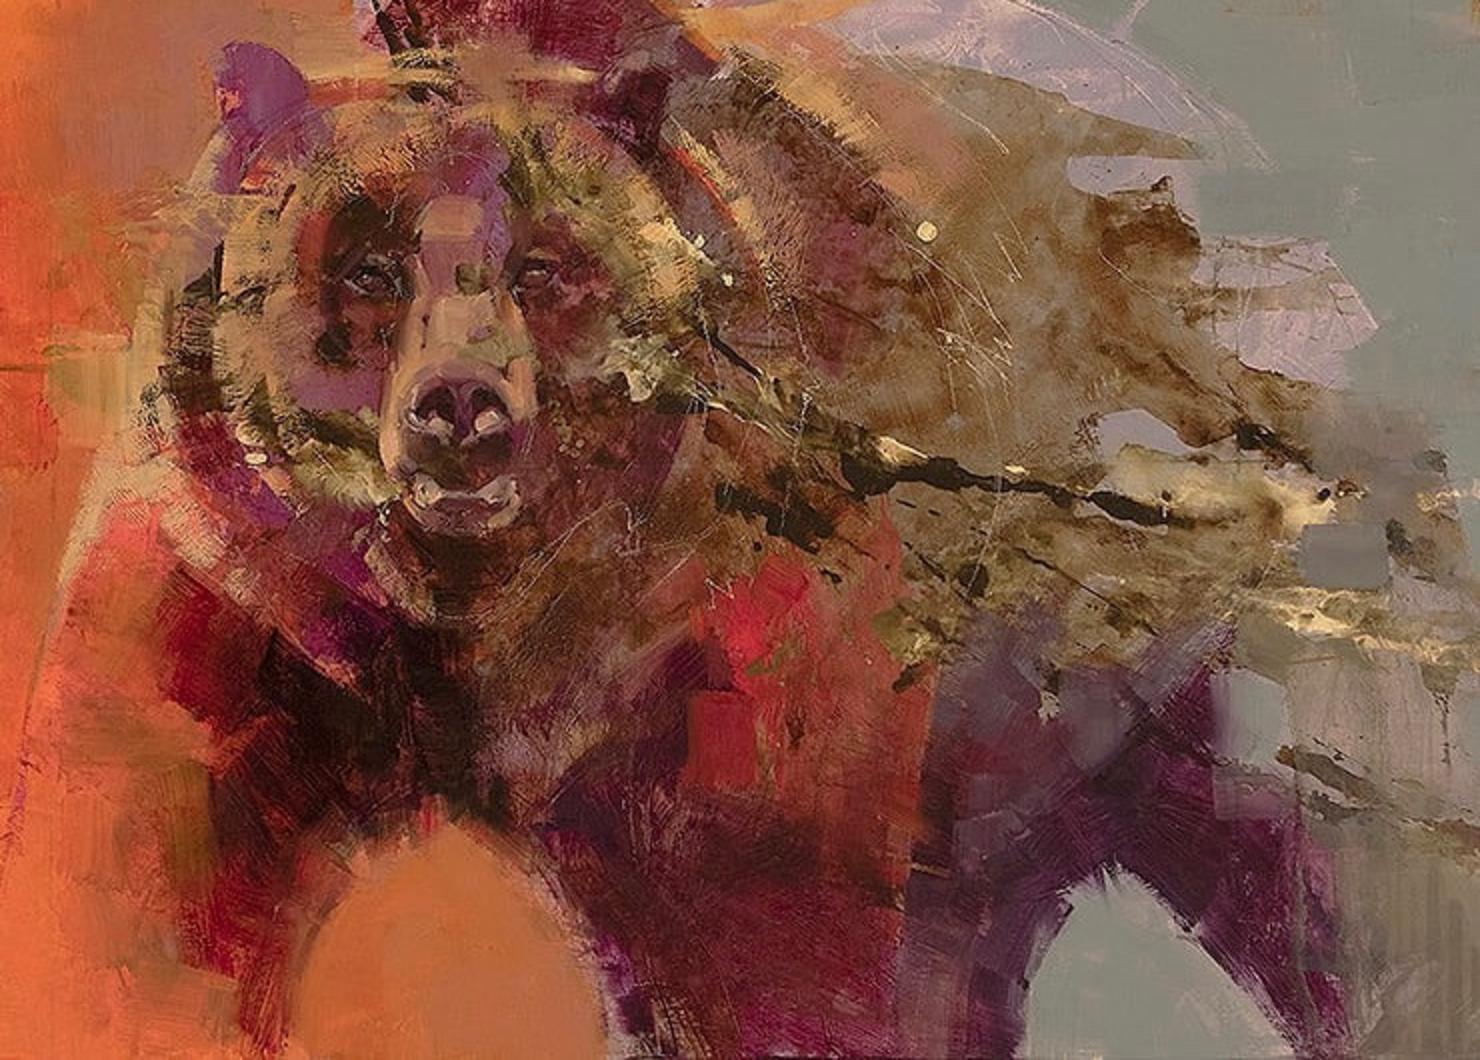 "Feeling the Heat," a painting by Julie T. Chapman. Imagine how different Greater Yellowstone and other parts of the Northern Rockies would "feel" without grizzlies, wolves, mountain lions and the many other non-human inhabitants. How would they feel—like 99 percent of the rest of tamed America. To see more of Chapman's amazing fine art, go to julietchapman.com